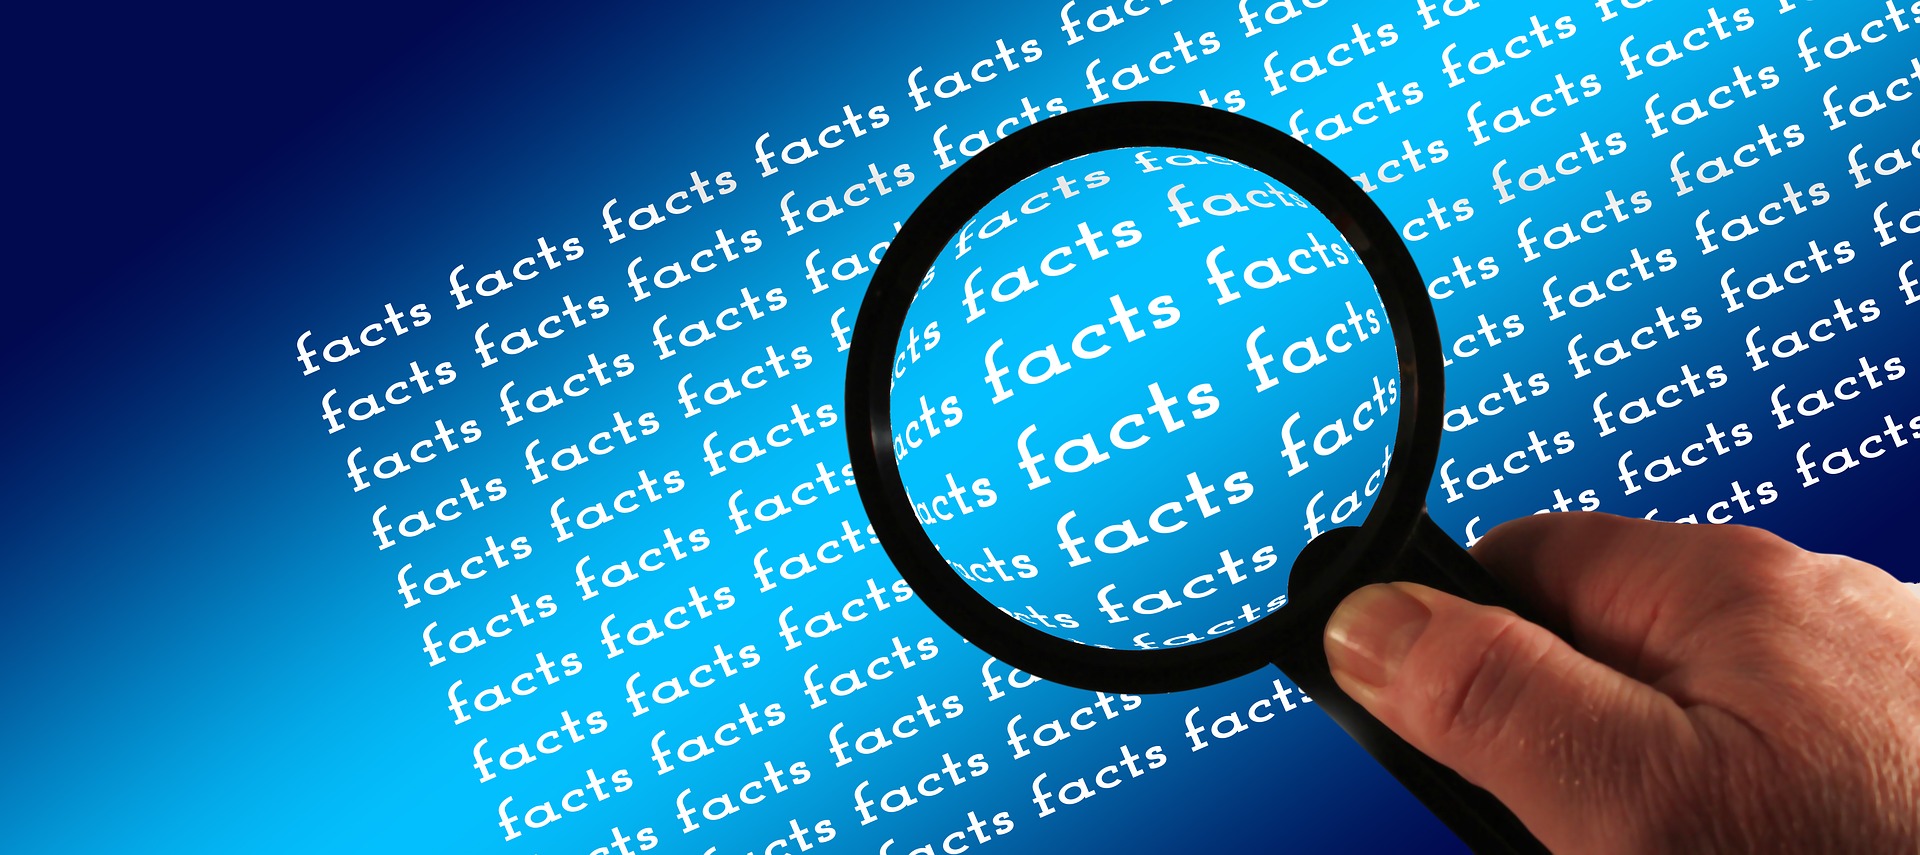 magnifying glass on facts